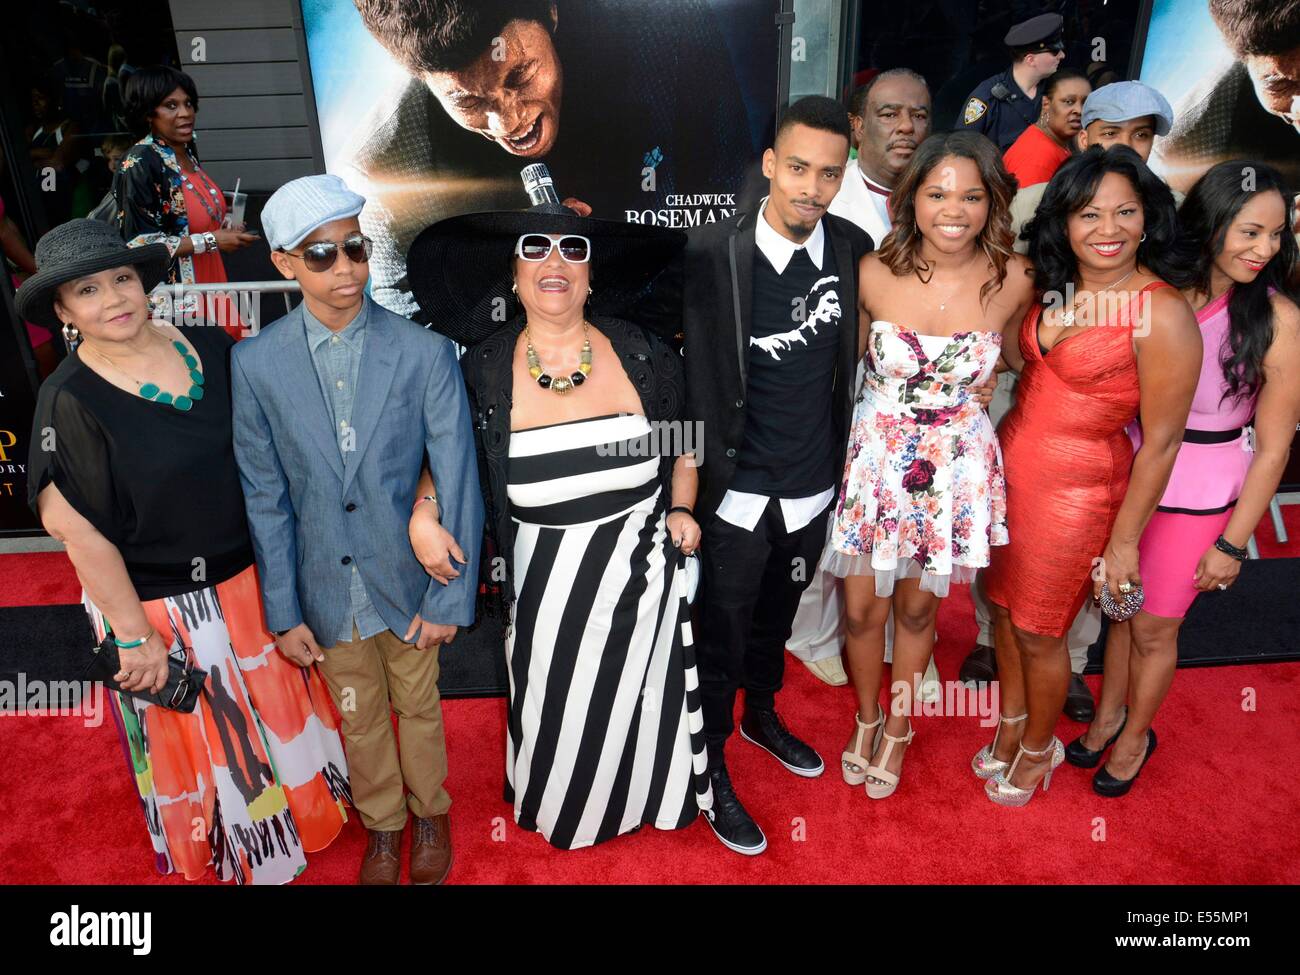 New York, NY, USA. 21st July, 2014. Dede Brown and James Brown's family at arrivals for GET ON UP Premiere, Apollo Theater, New York, NY July 21, 2014. Credit:  Derek Storm/Everett Collection/Alamy Live News Stock Photo